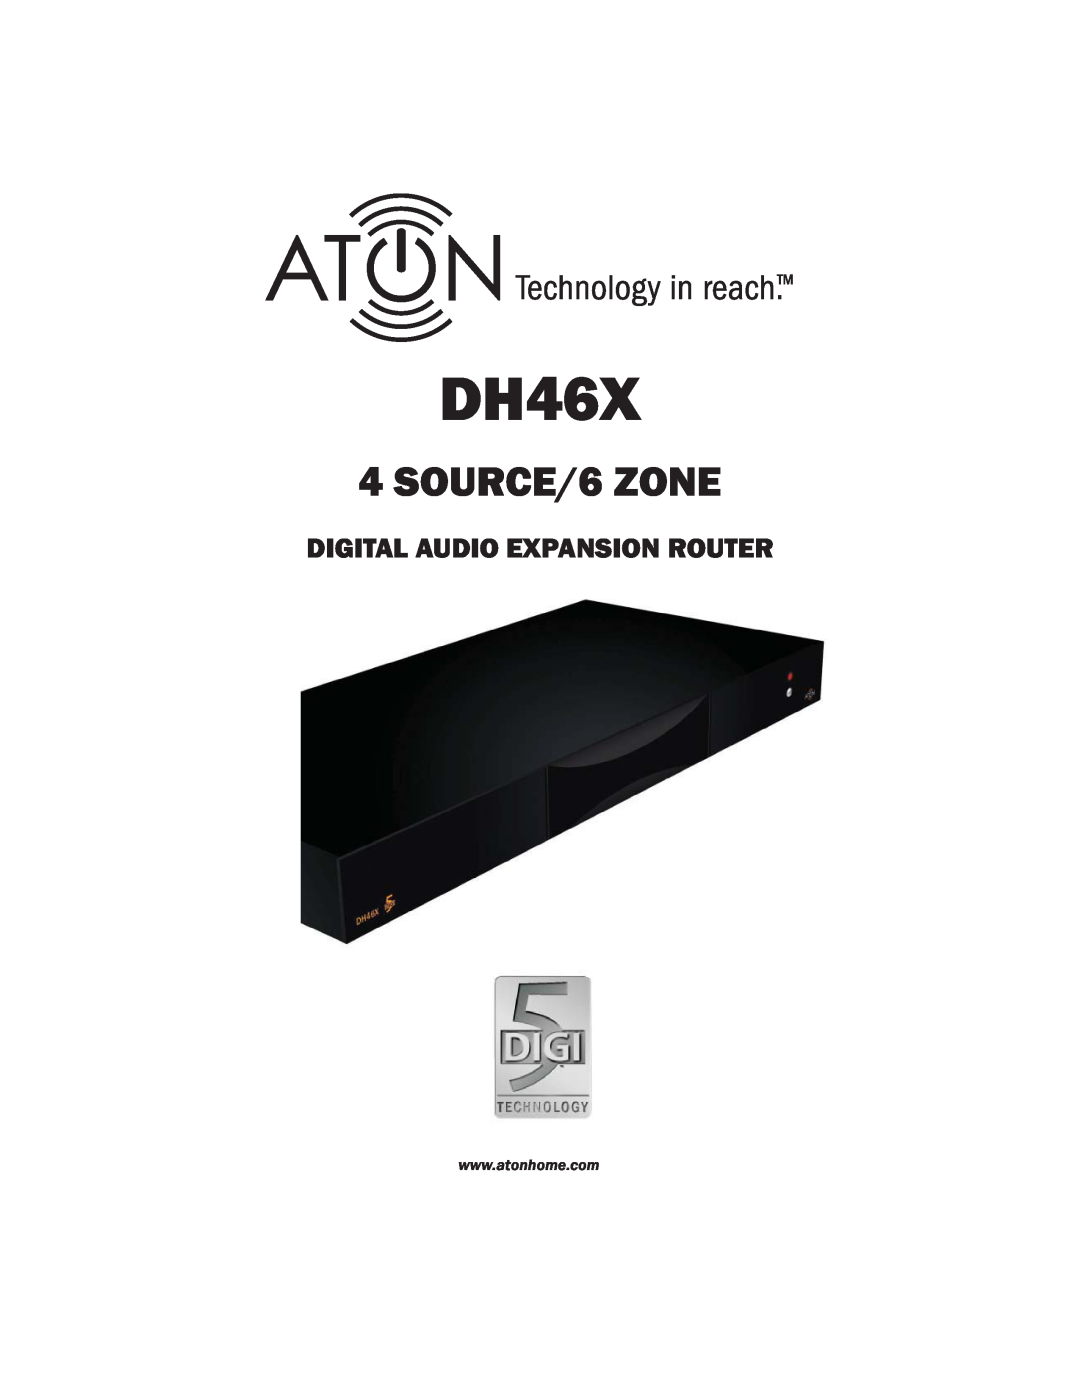 ATON DH46X manual SOURCE/6 ZONE, Digital Audio Expansion Router 